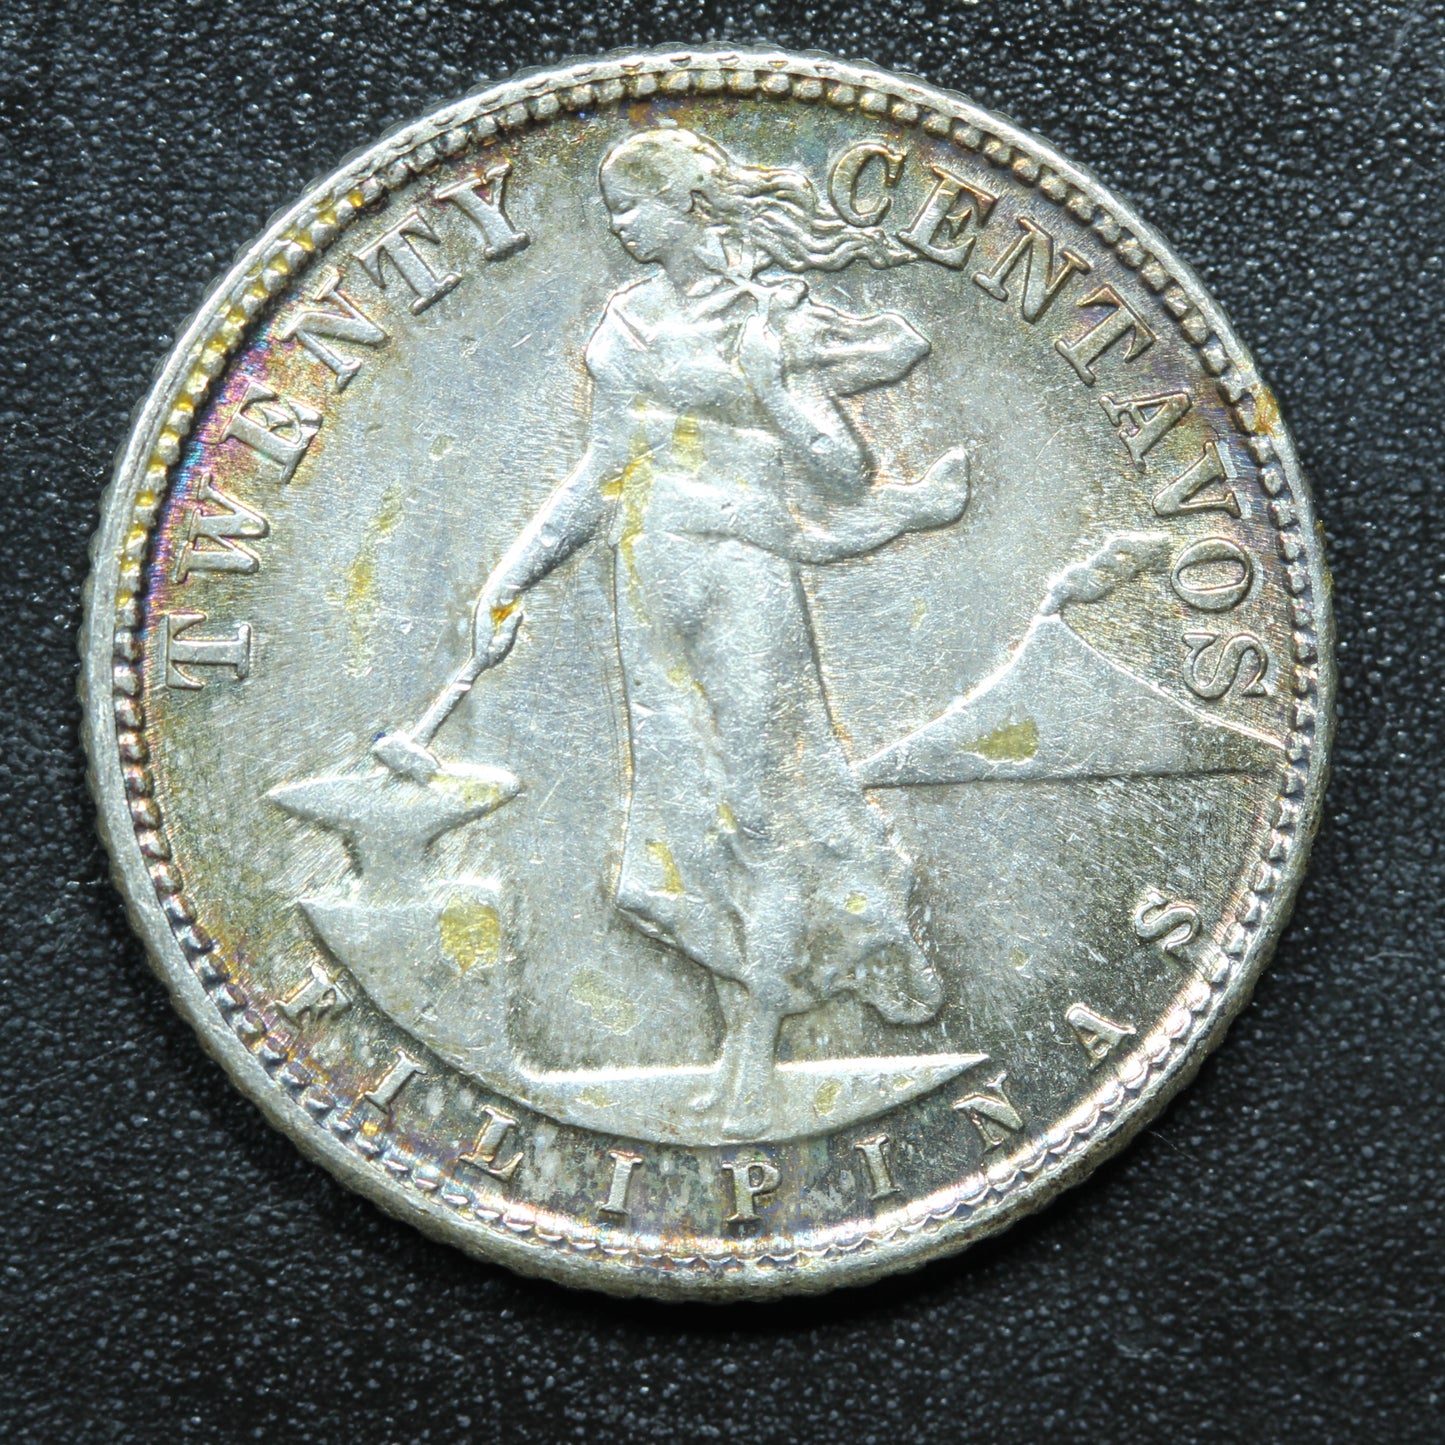 1945 D 20 Centavos Philippines Silver Coin.  75% Silver Coinage